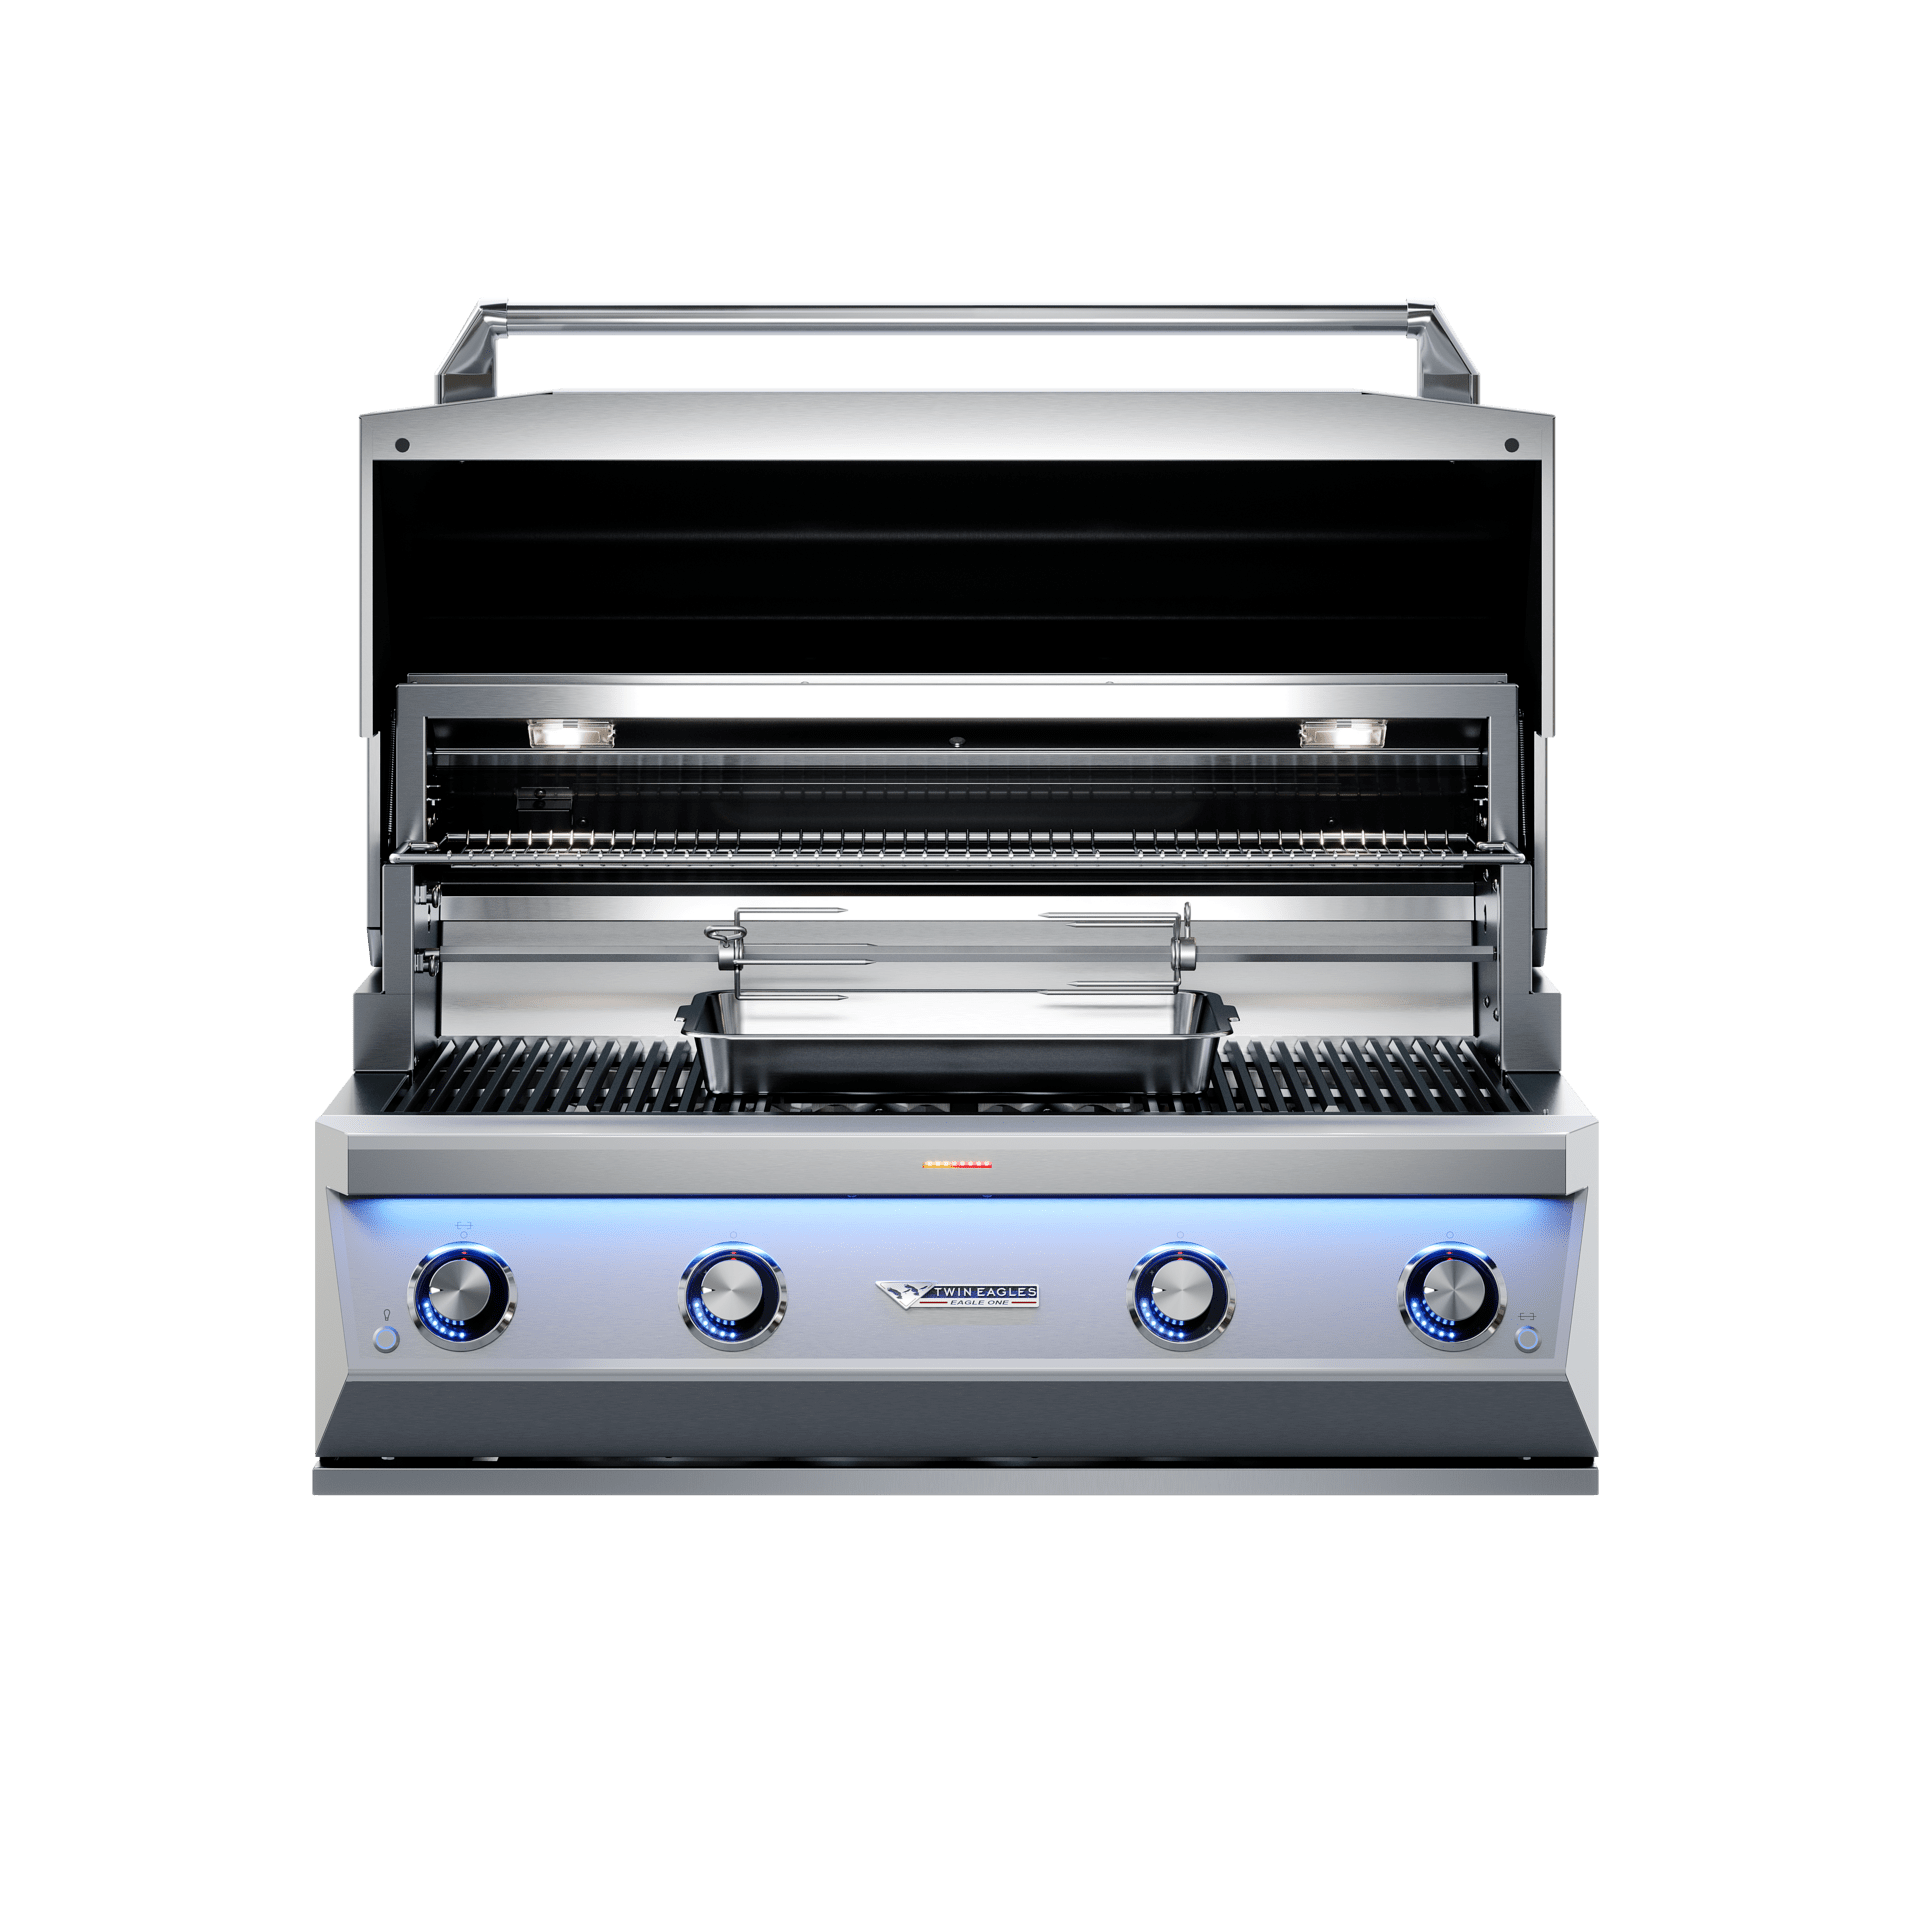 https://www.twineaglesgrills.com/externalassets/dometic-twin-eagles-eagle-one-42_9600050229_88211.png?ref=1363761497